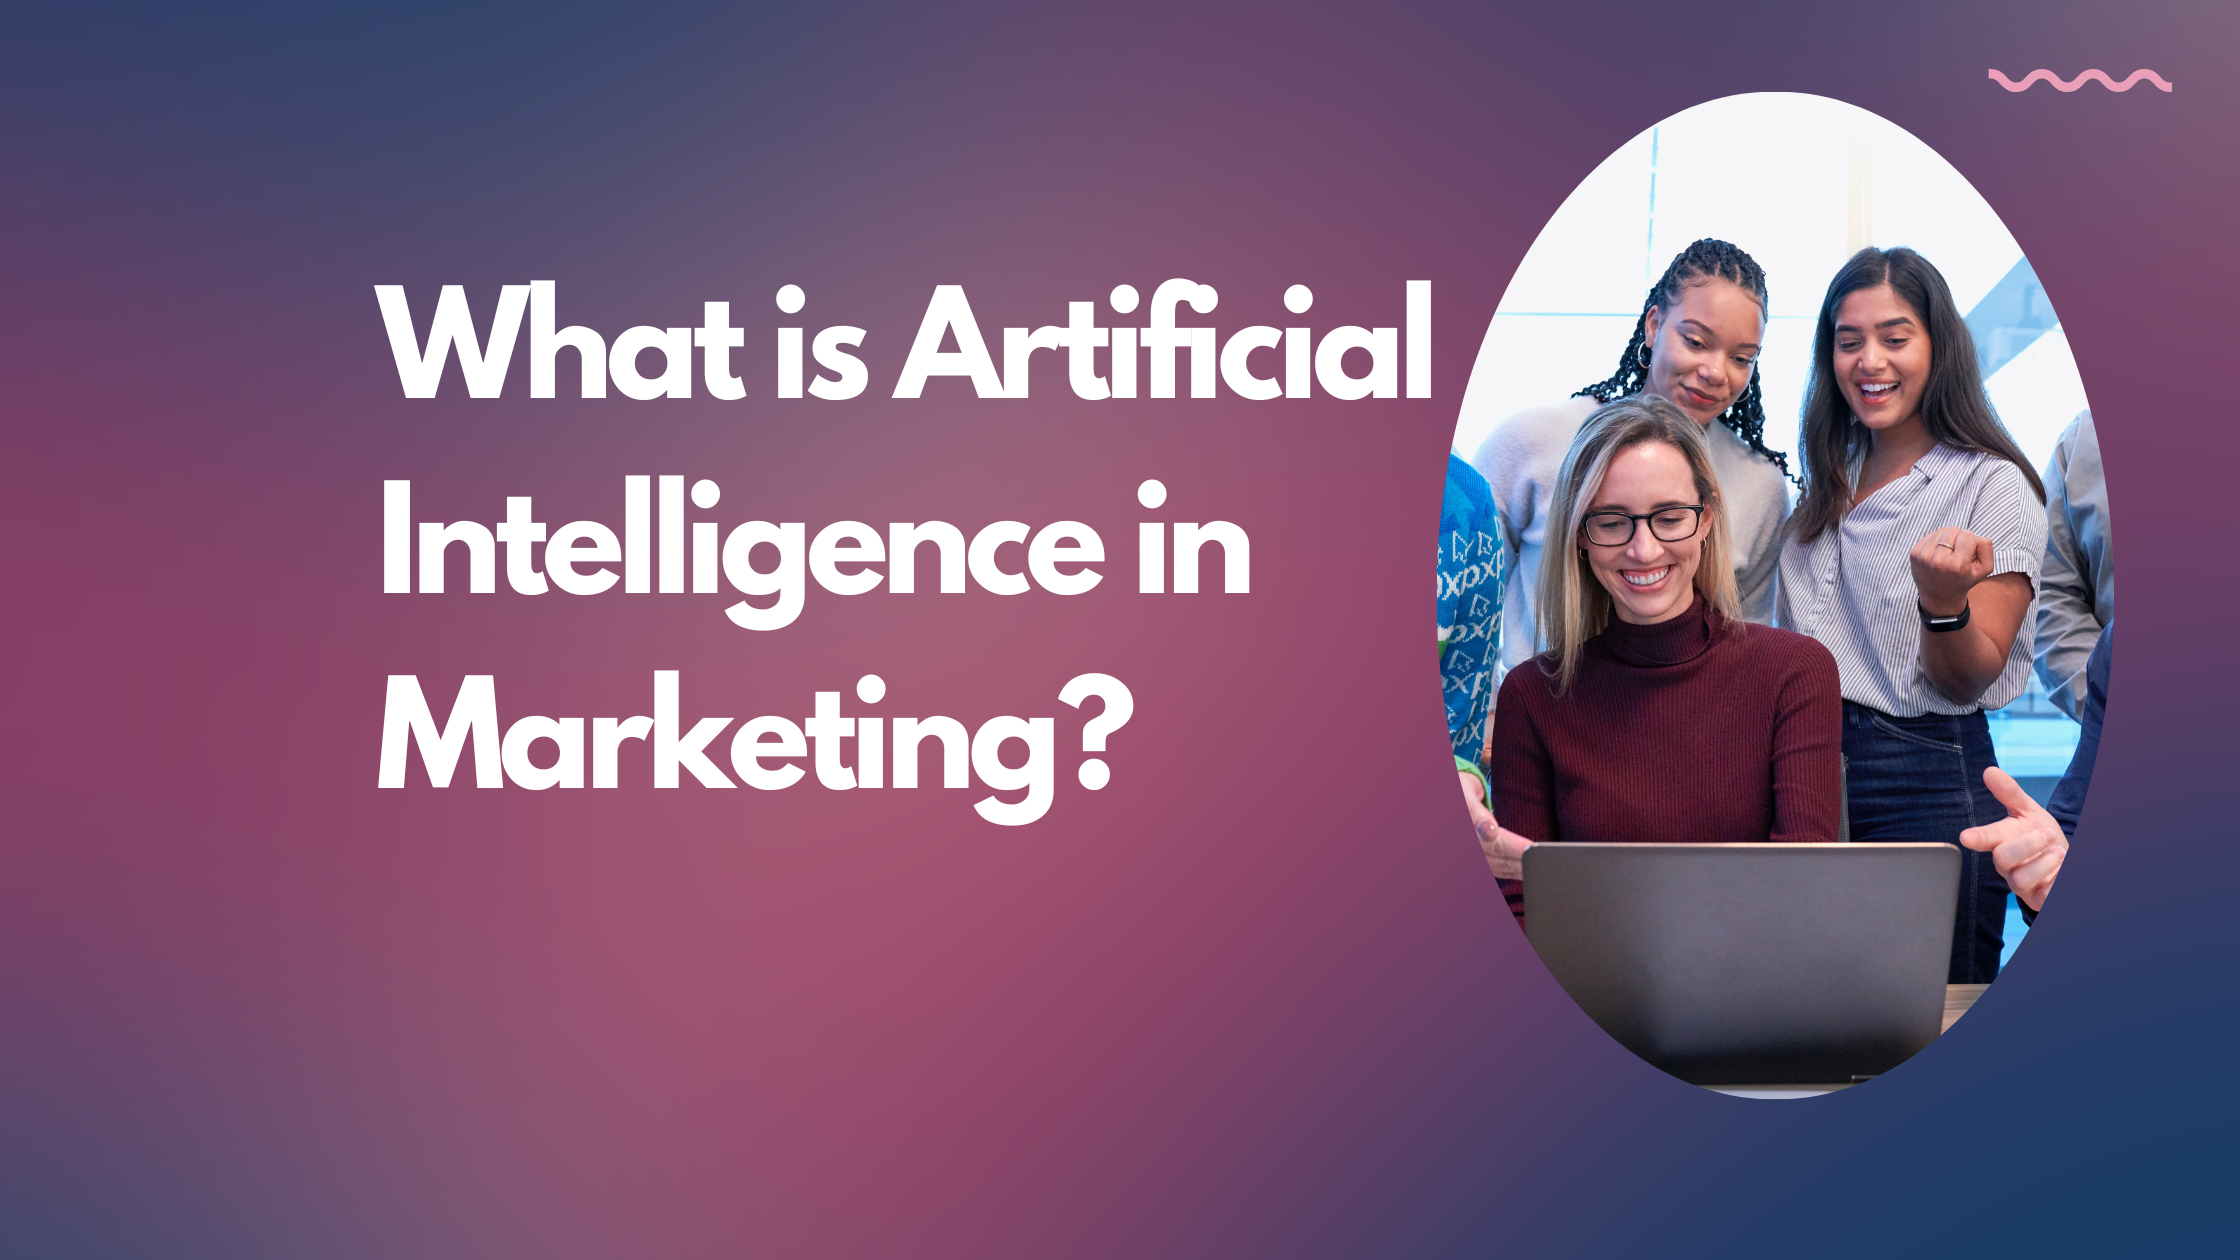 What is artificial intelligence in marketing?